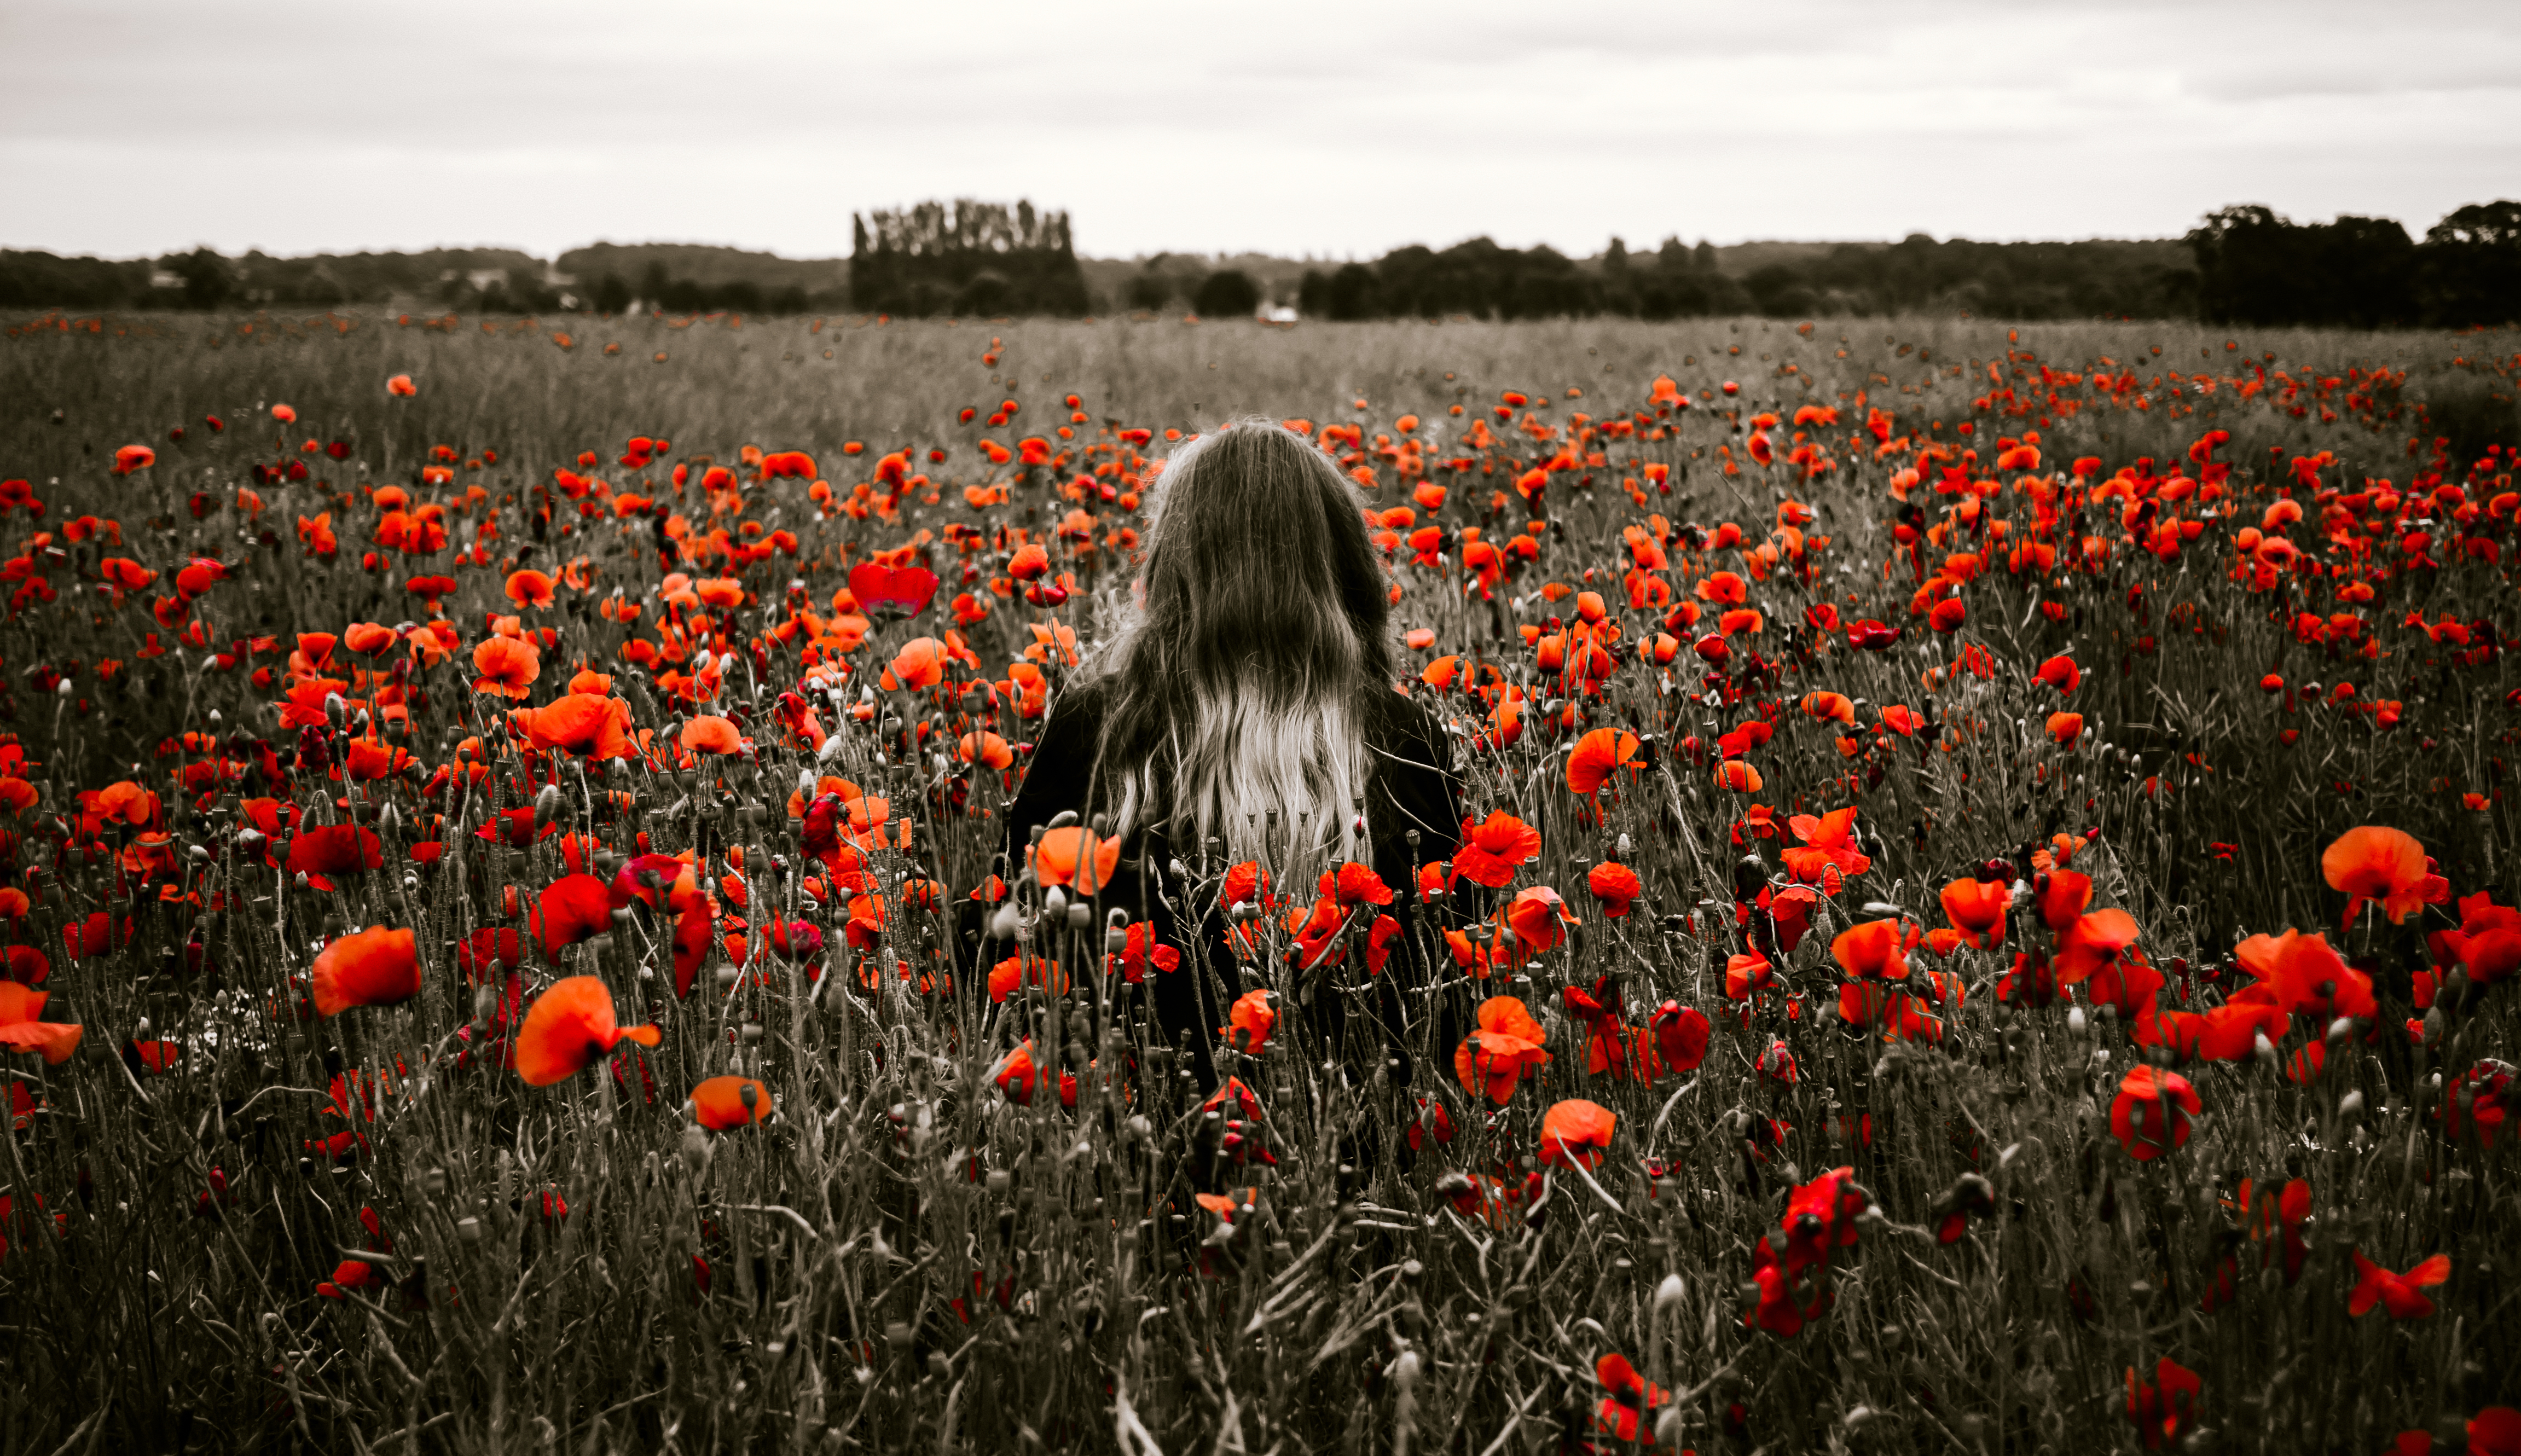 girl, flowers, poppies, nature, field